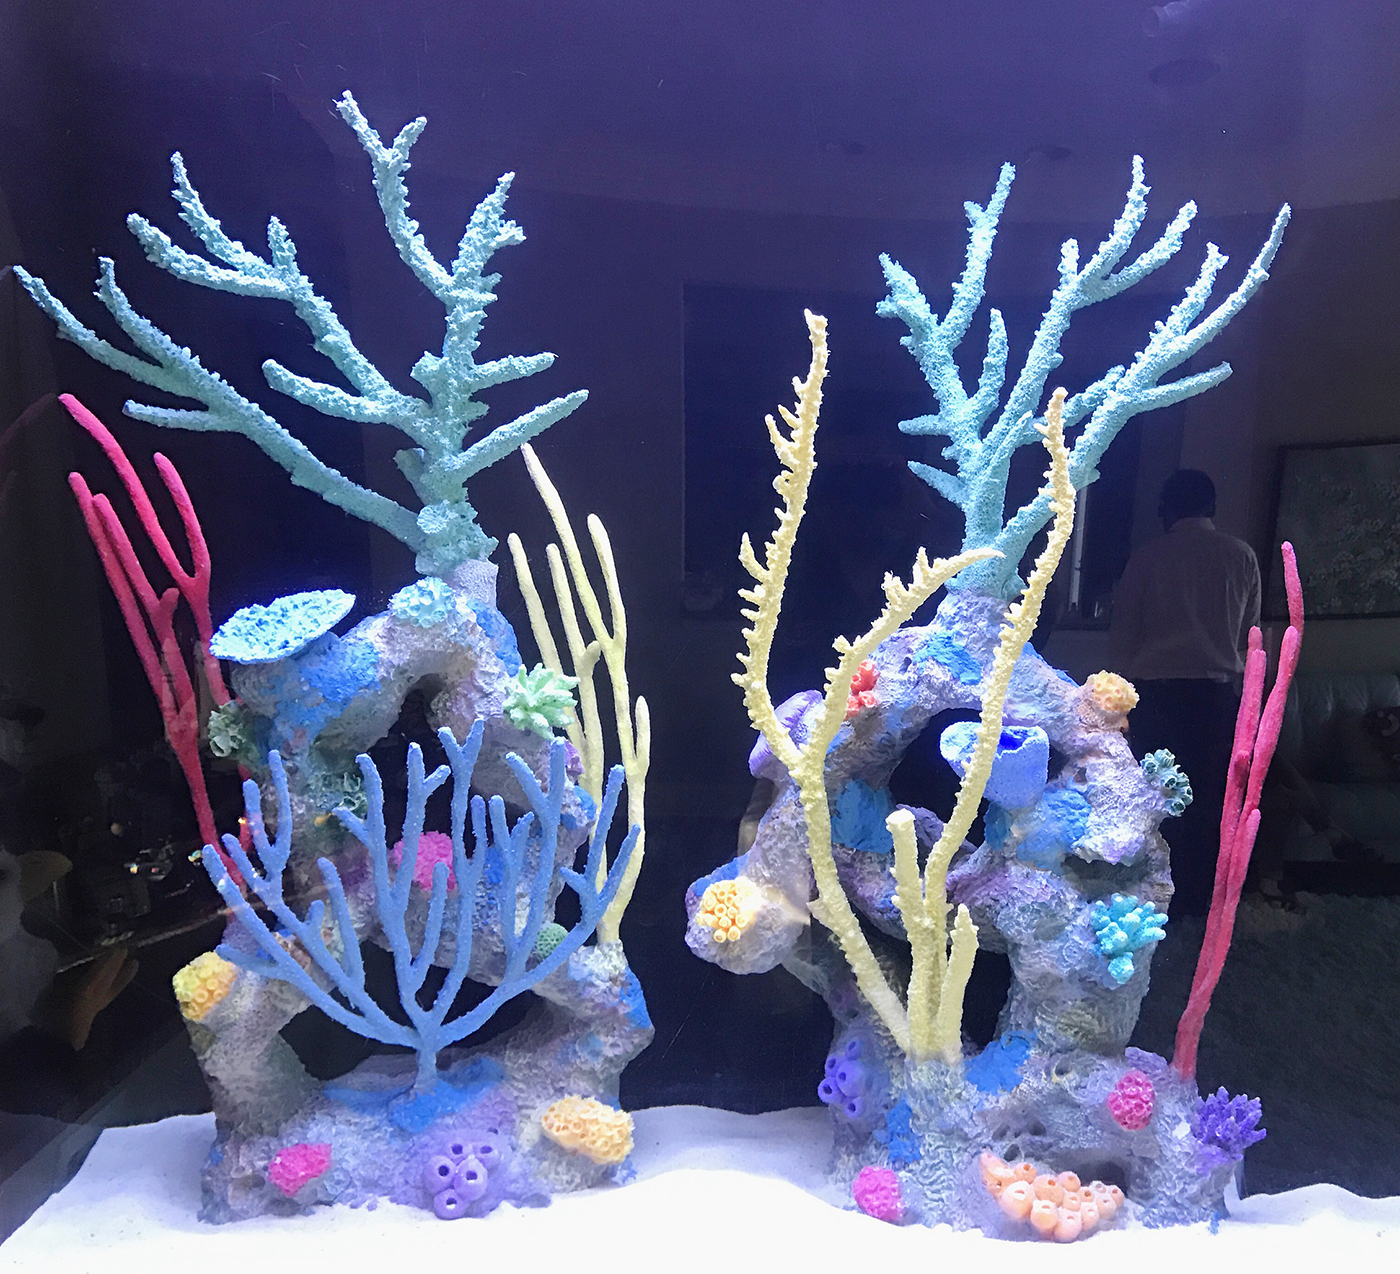 Freshwater Fish Aquarium with Artificial Coral Reef Tank Decorations -  YouTube